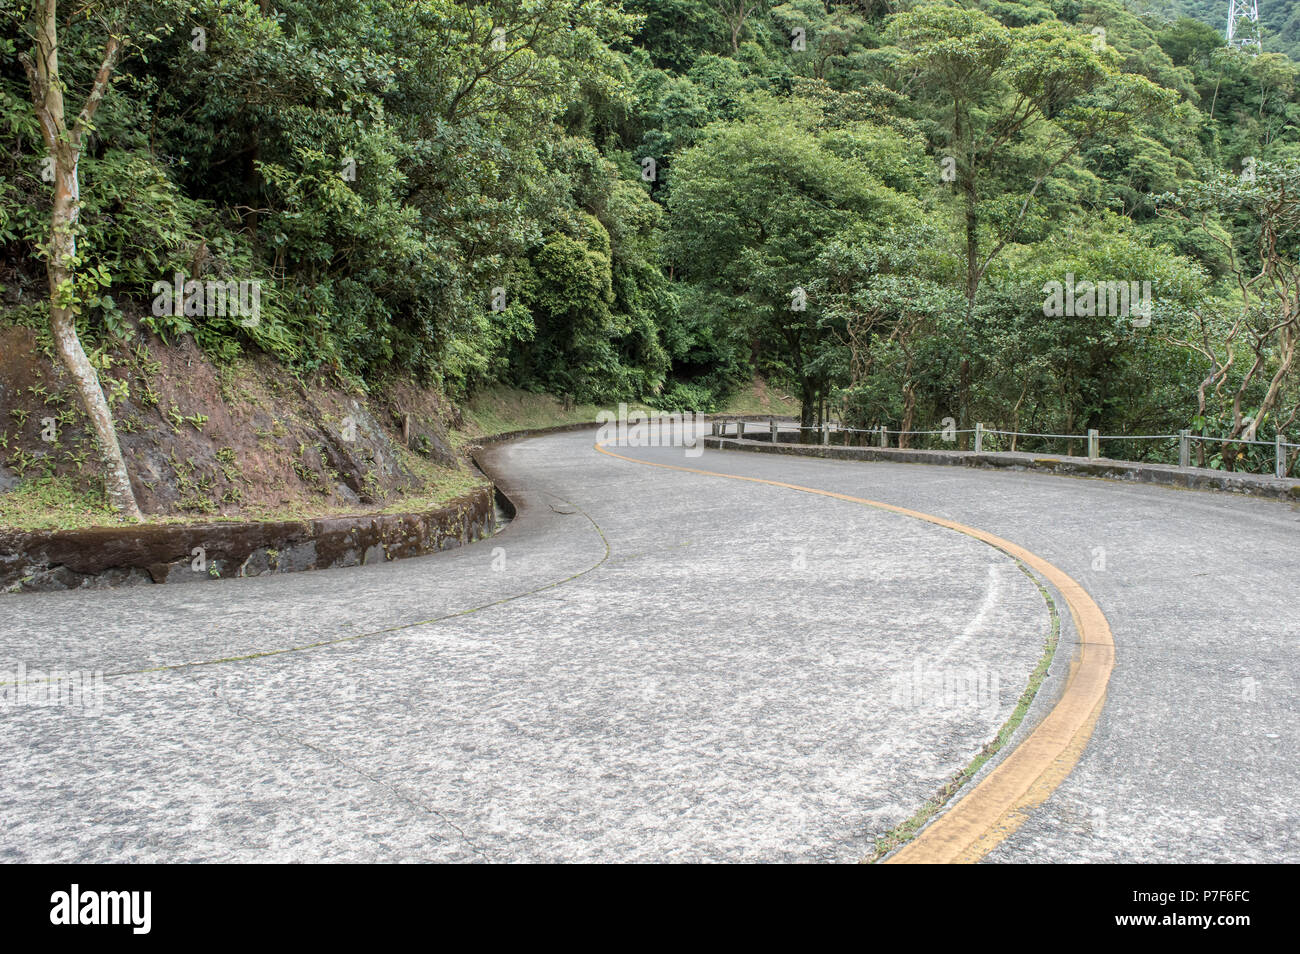 An 'S' curve in a road surrounded by nature Stock Photo